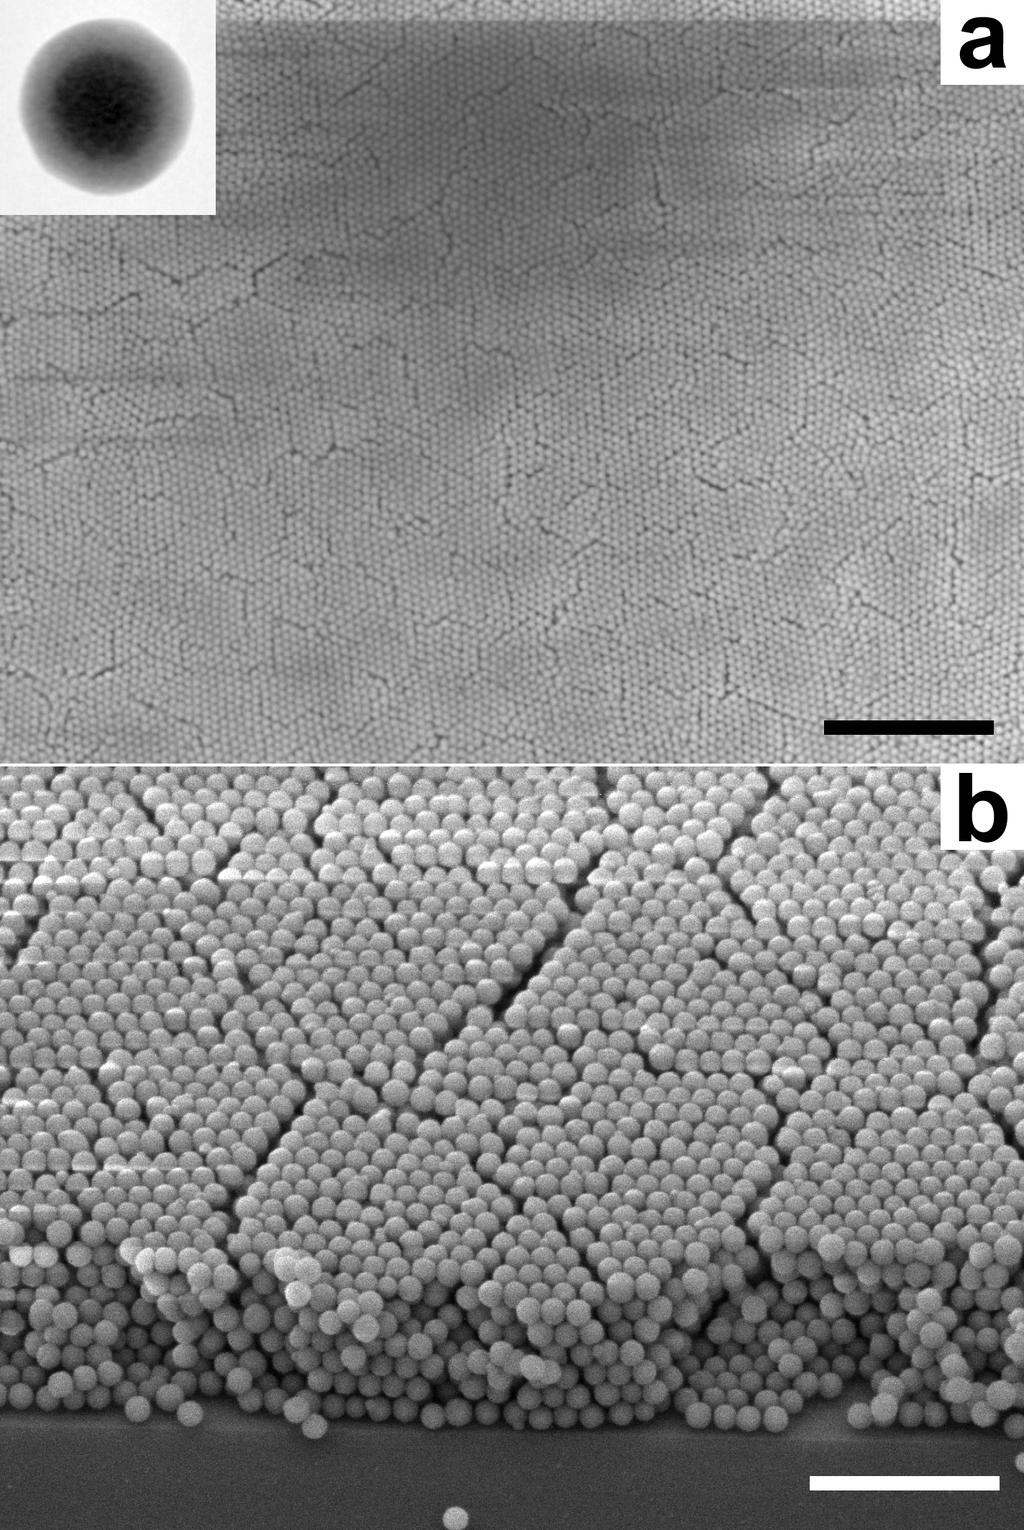 FIG. 1. Scanning electron micrographs (SEM) of a planar photonic crystal of close-packed core-shell colloidal particles. (a) Top view of the crystal showing a [111]-crystal plane.